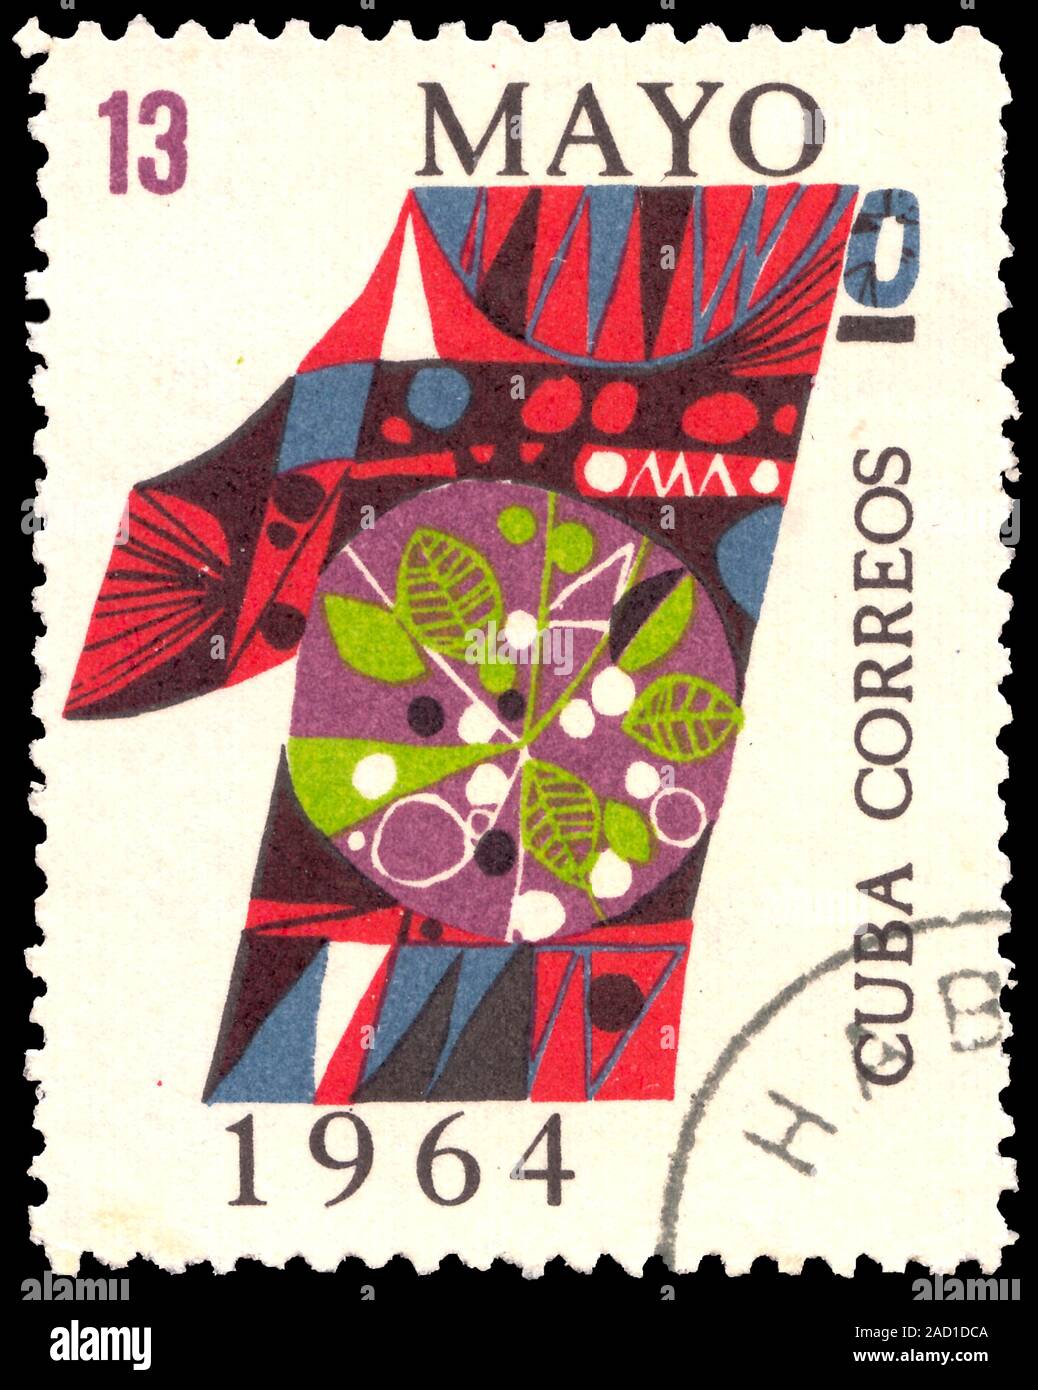 Cuba - circa 1964.a stamp printed in Cuba shows International Workers'- Labour Day 1 the first May. Circa 1964 Stock Photo